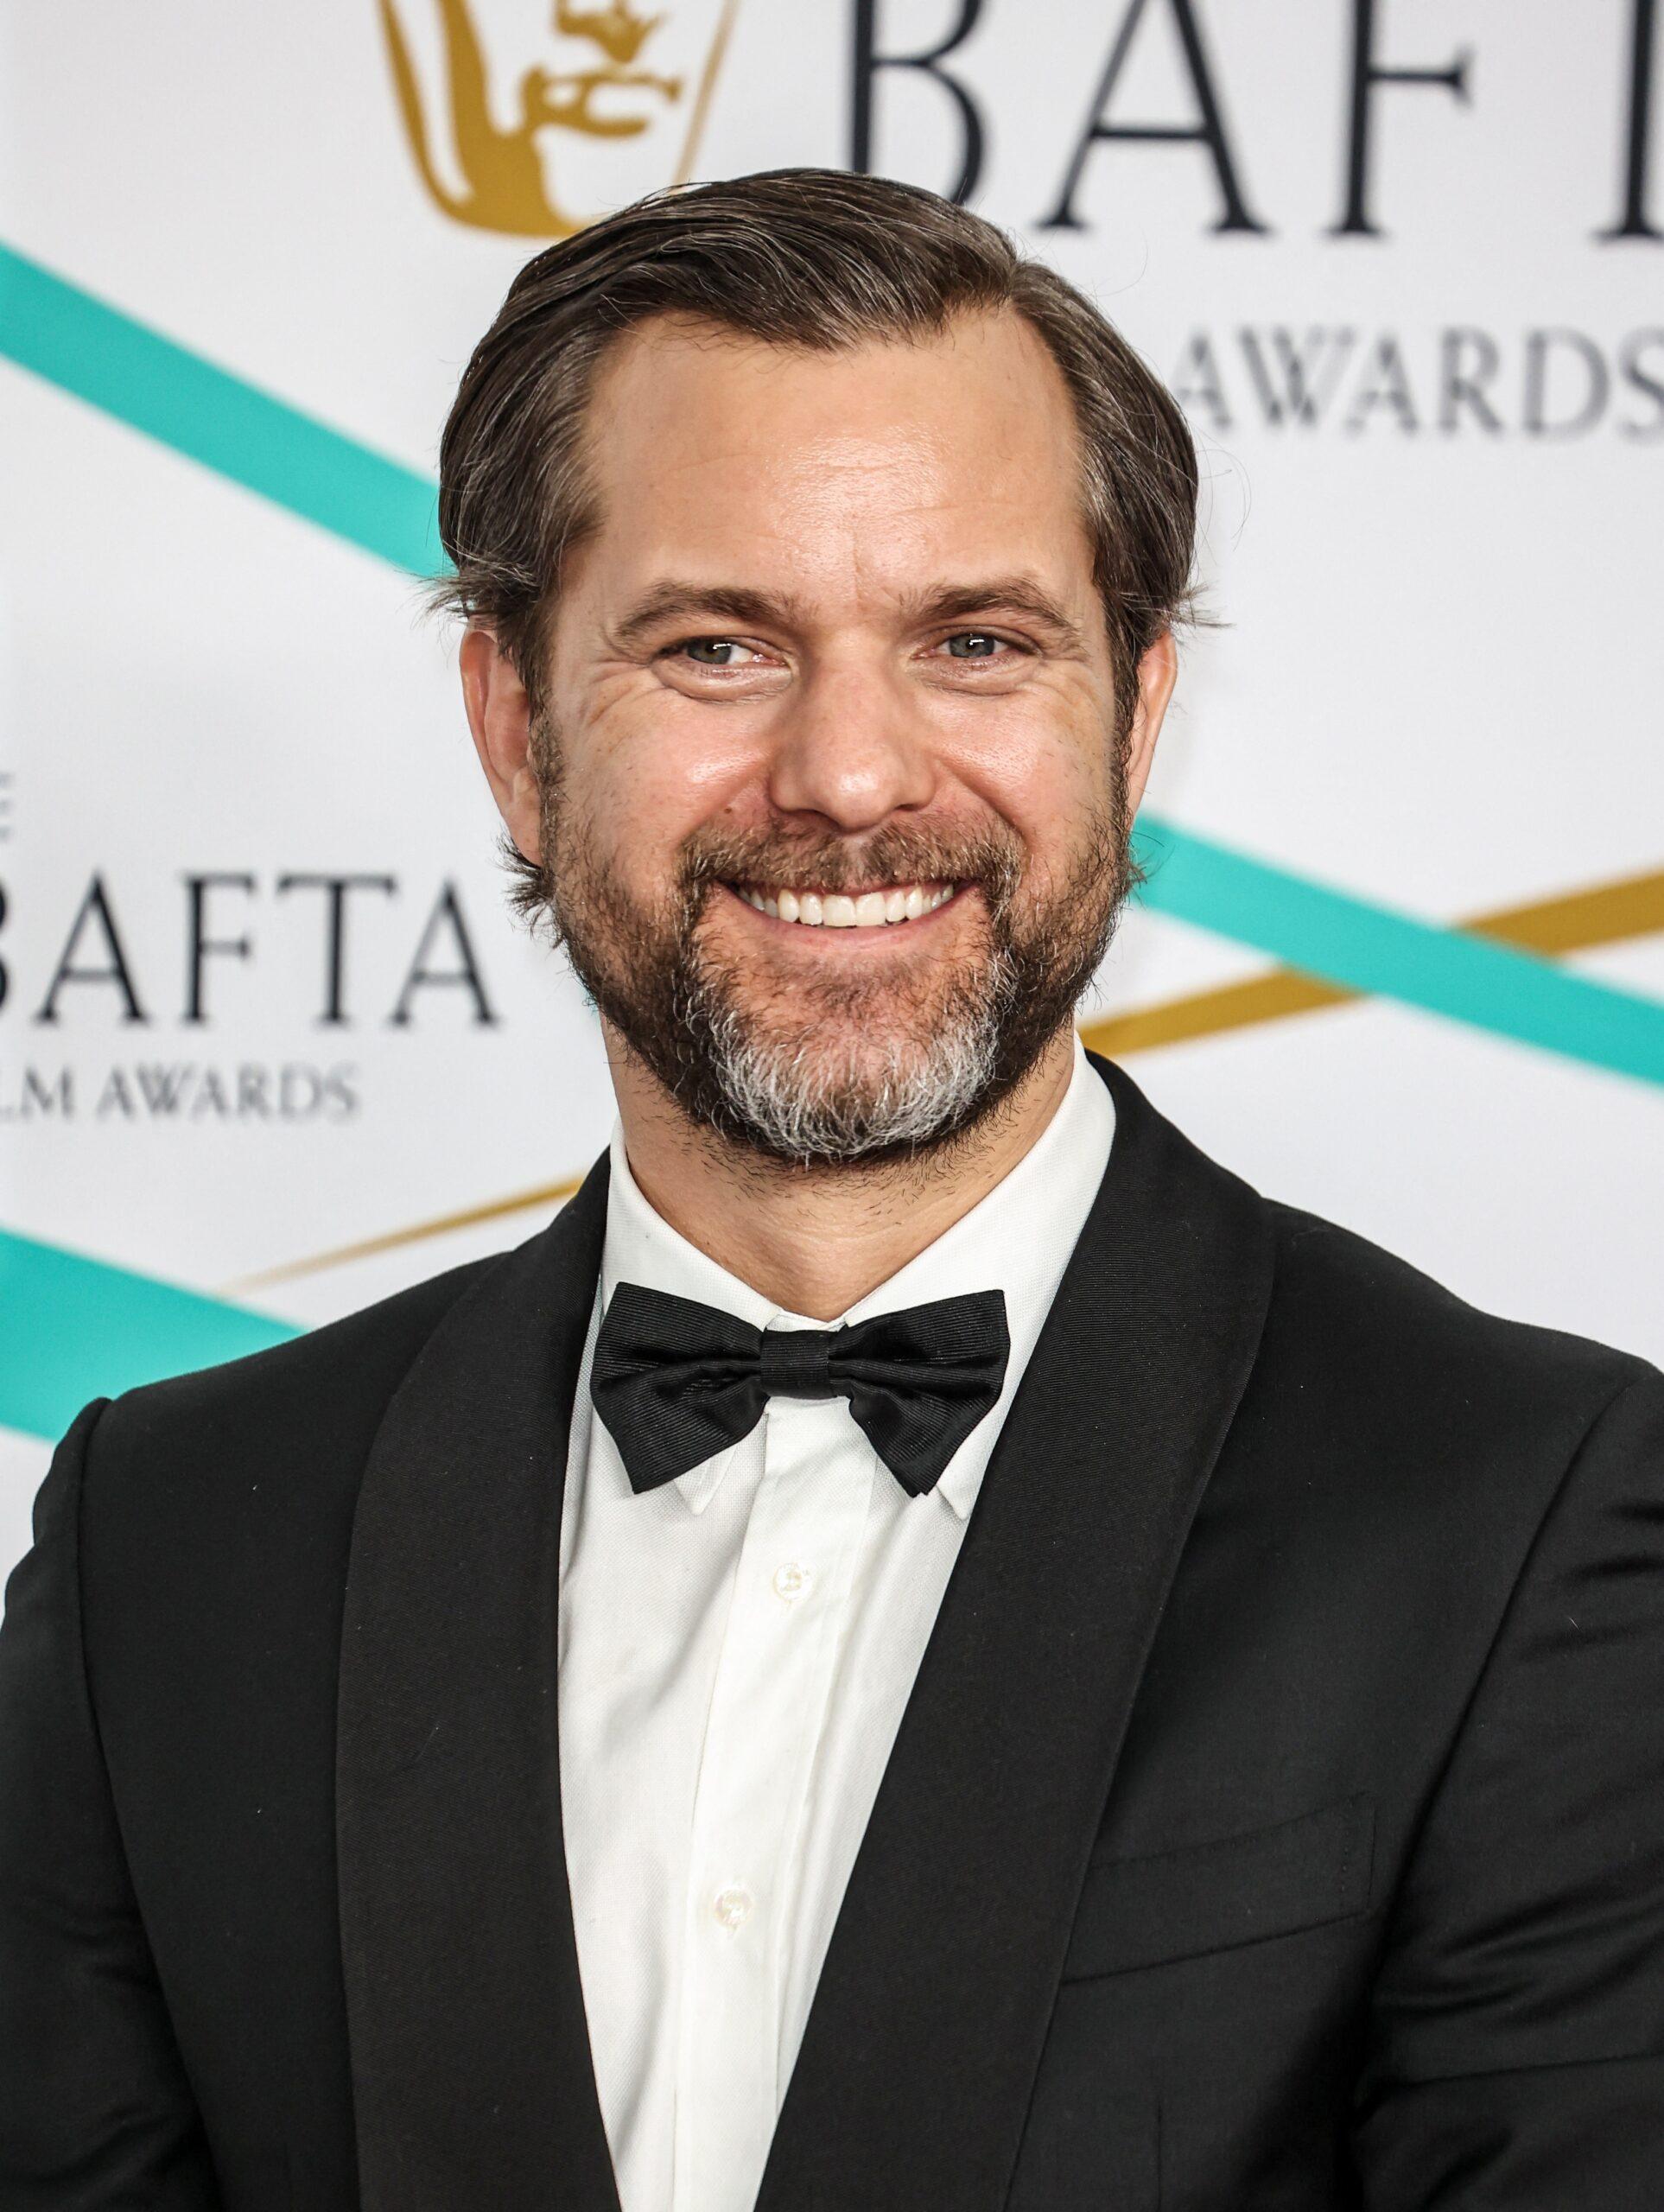 Joshua Jackson Reveals How Wife Jodie Turner-Smith Changed His Views On Marriage And Kids